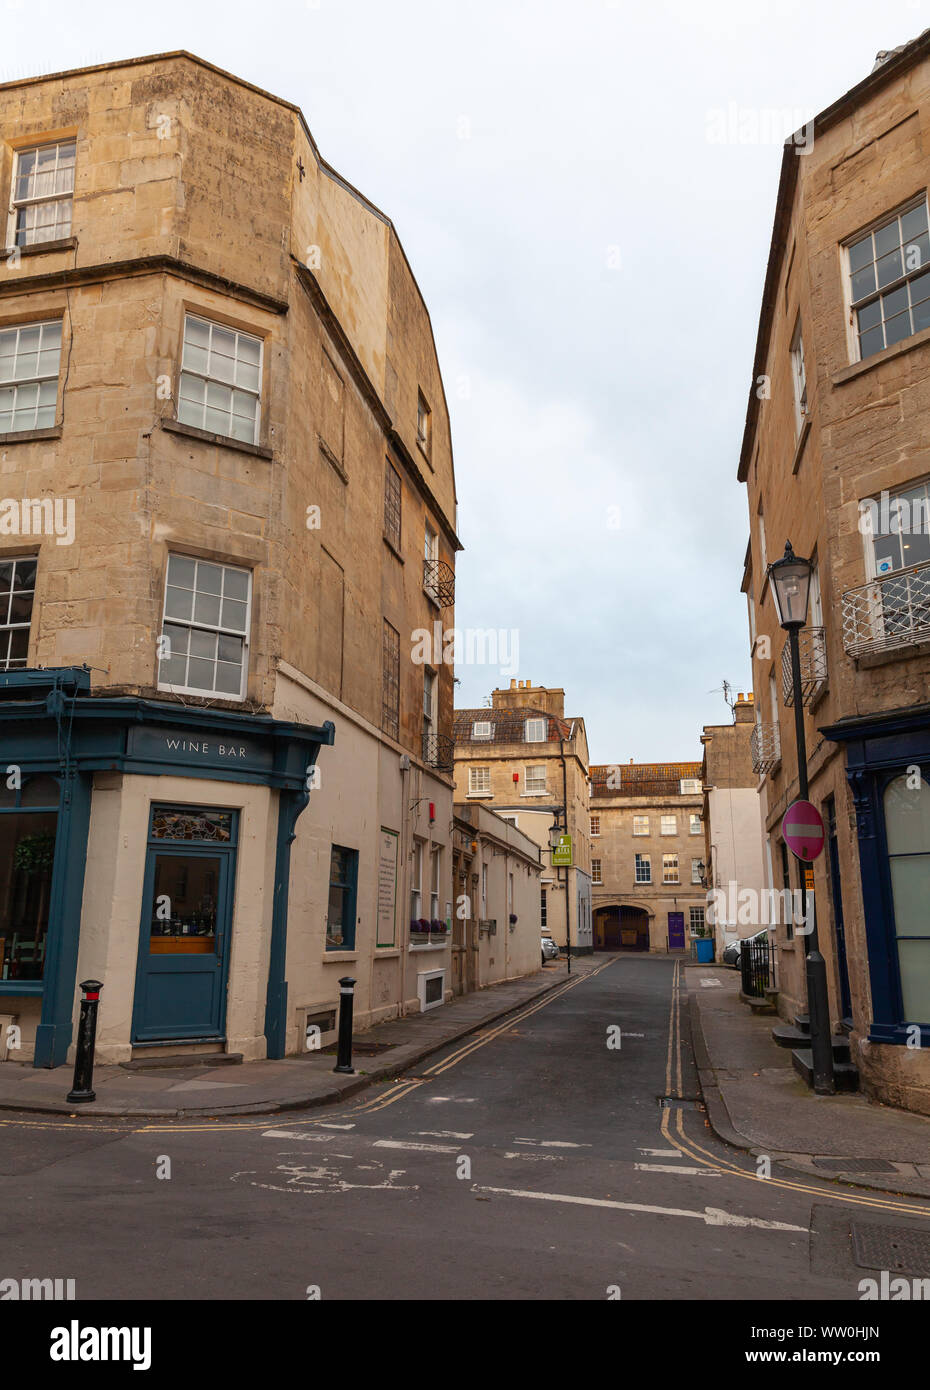 Bath, United Kingdom - November 1, 2017: Street view with old stone living houses of Bath, Somerset.  The city became a World Heritage Site in 1987 Stock Photo